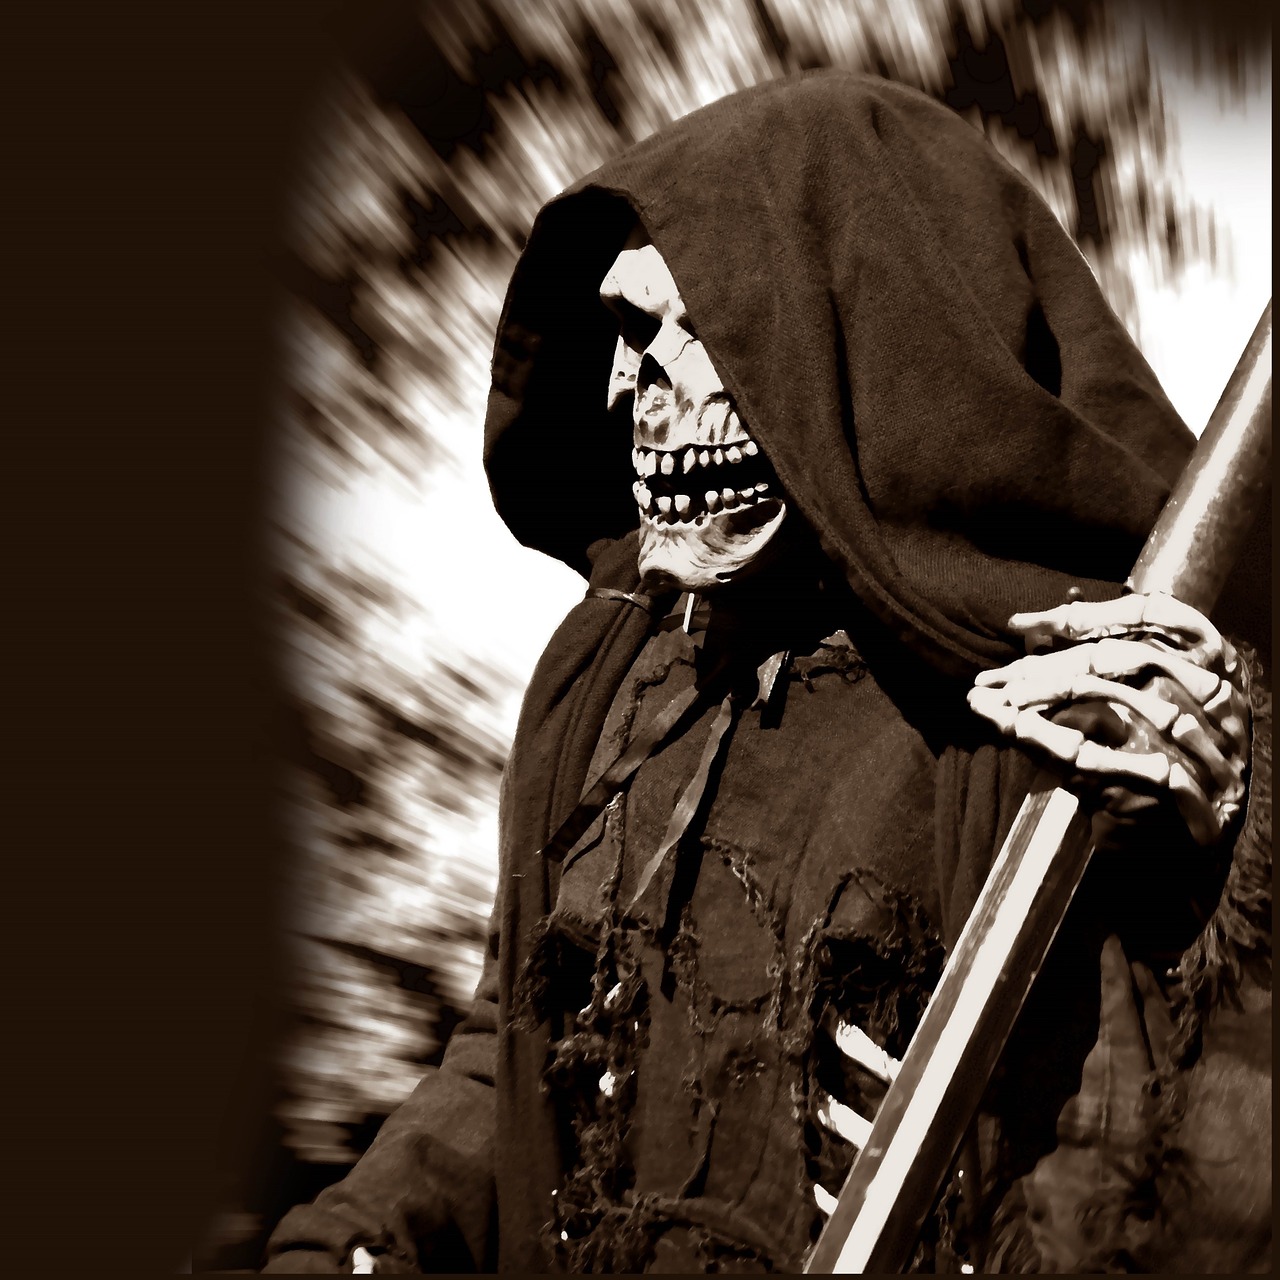 grim reaper the death man with the scythe free photo